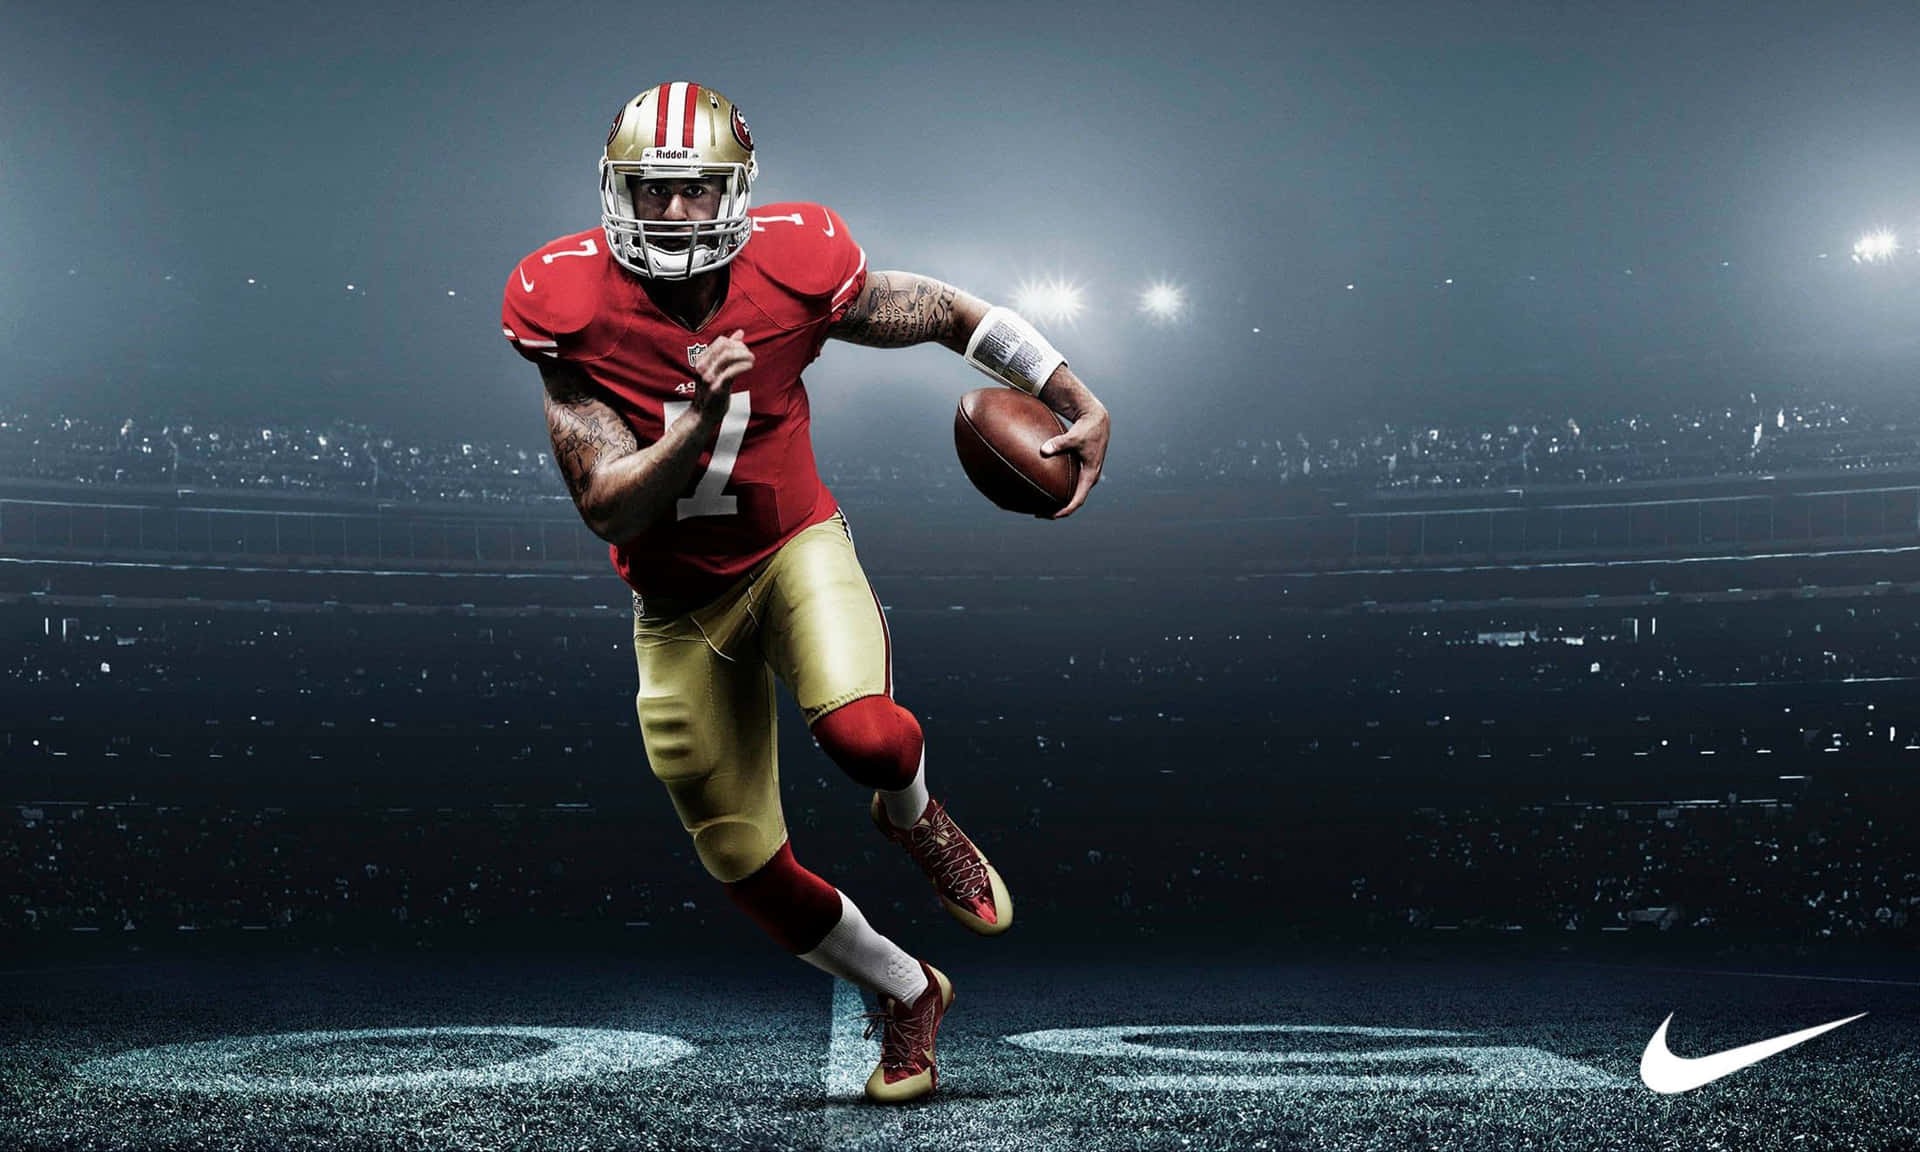 Join the excitement of the NFL with these awesome HD images Wallpaper